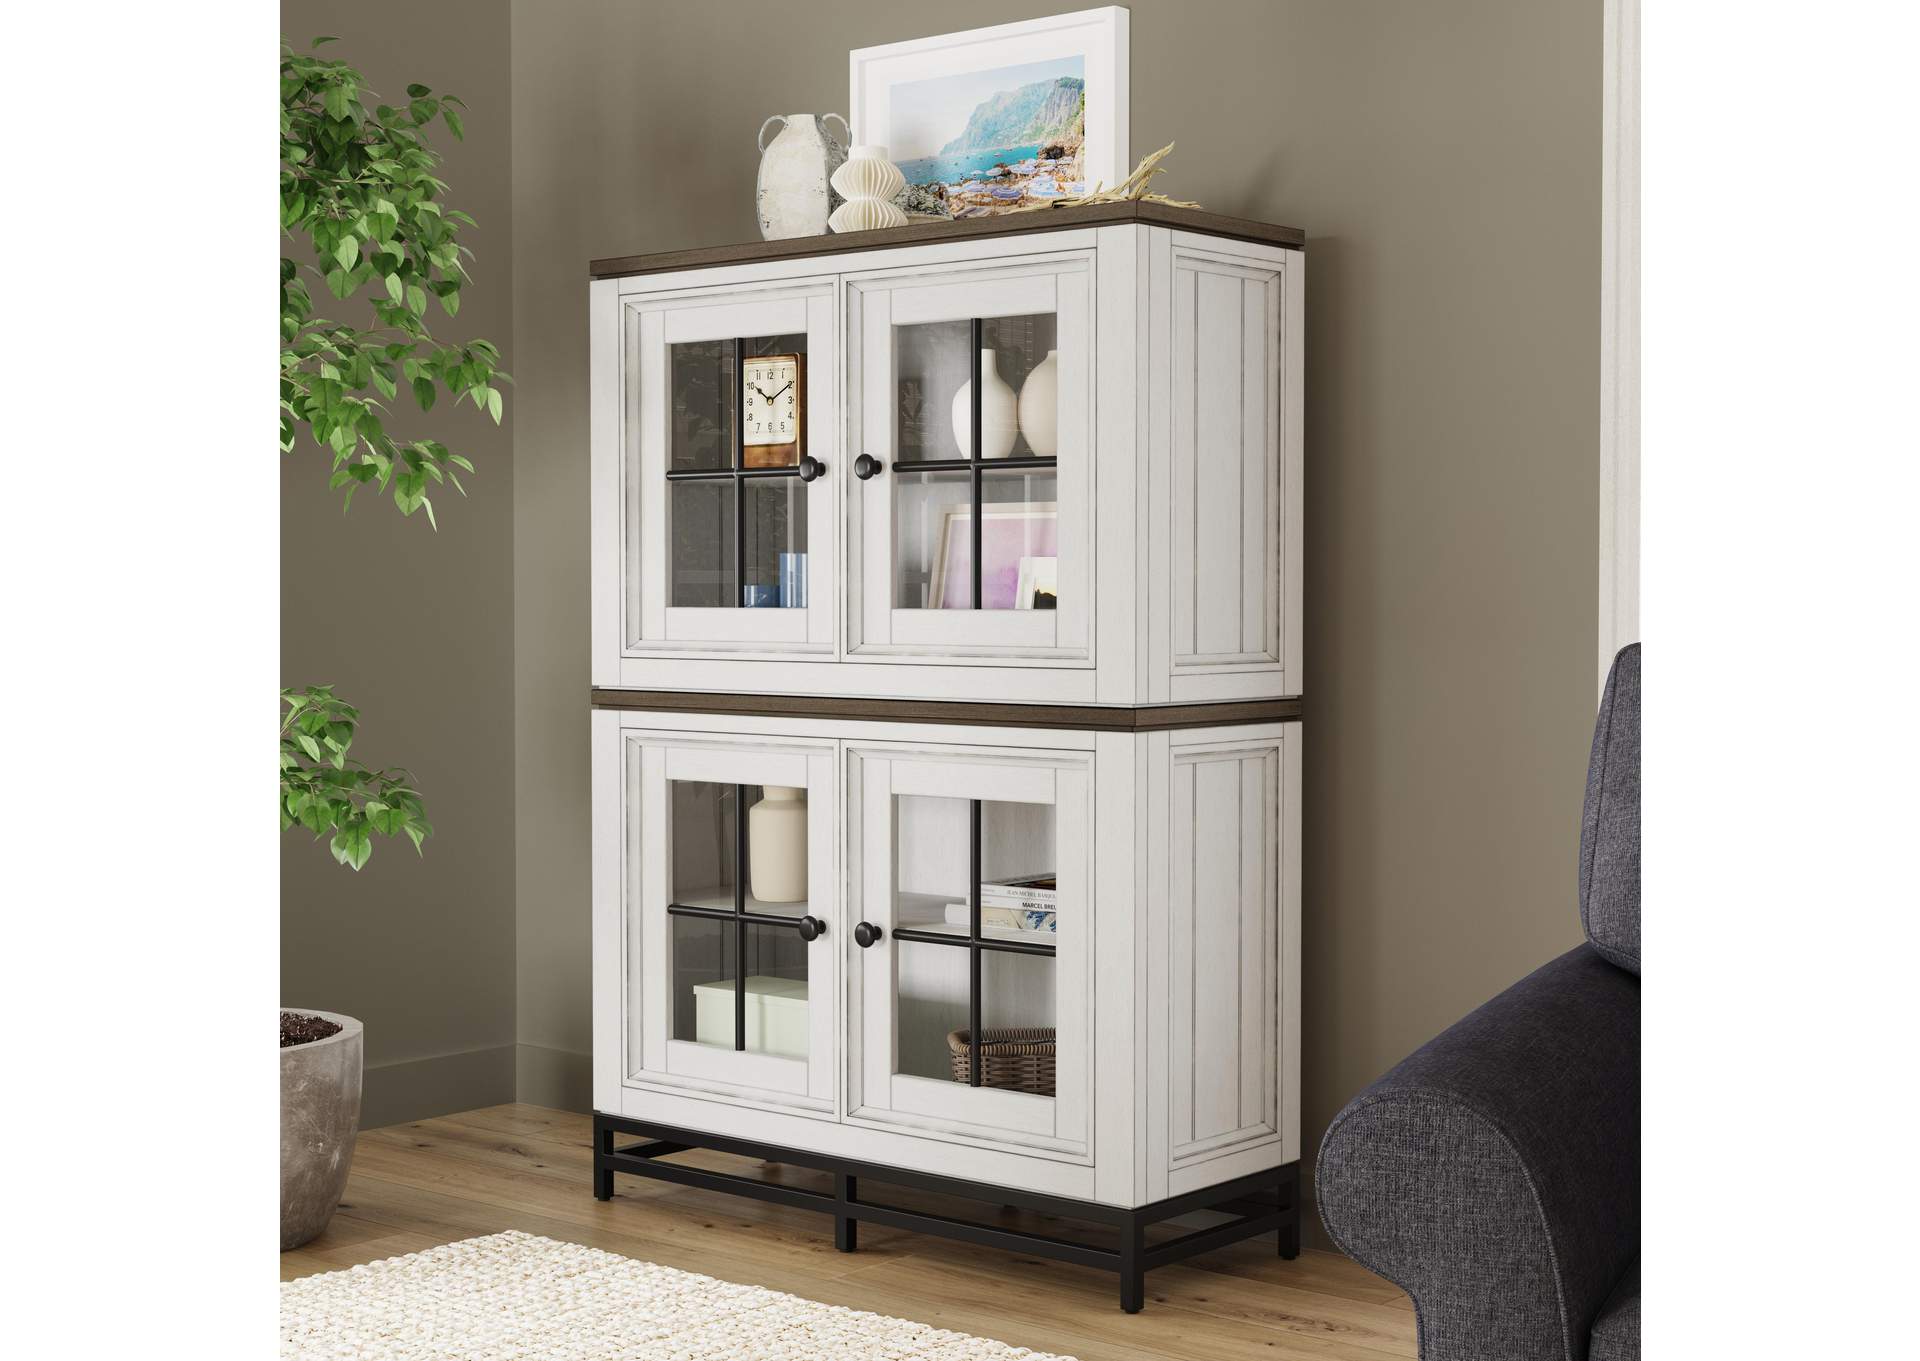 Melody Stacking Bookcase,Flexsteel